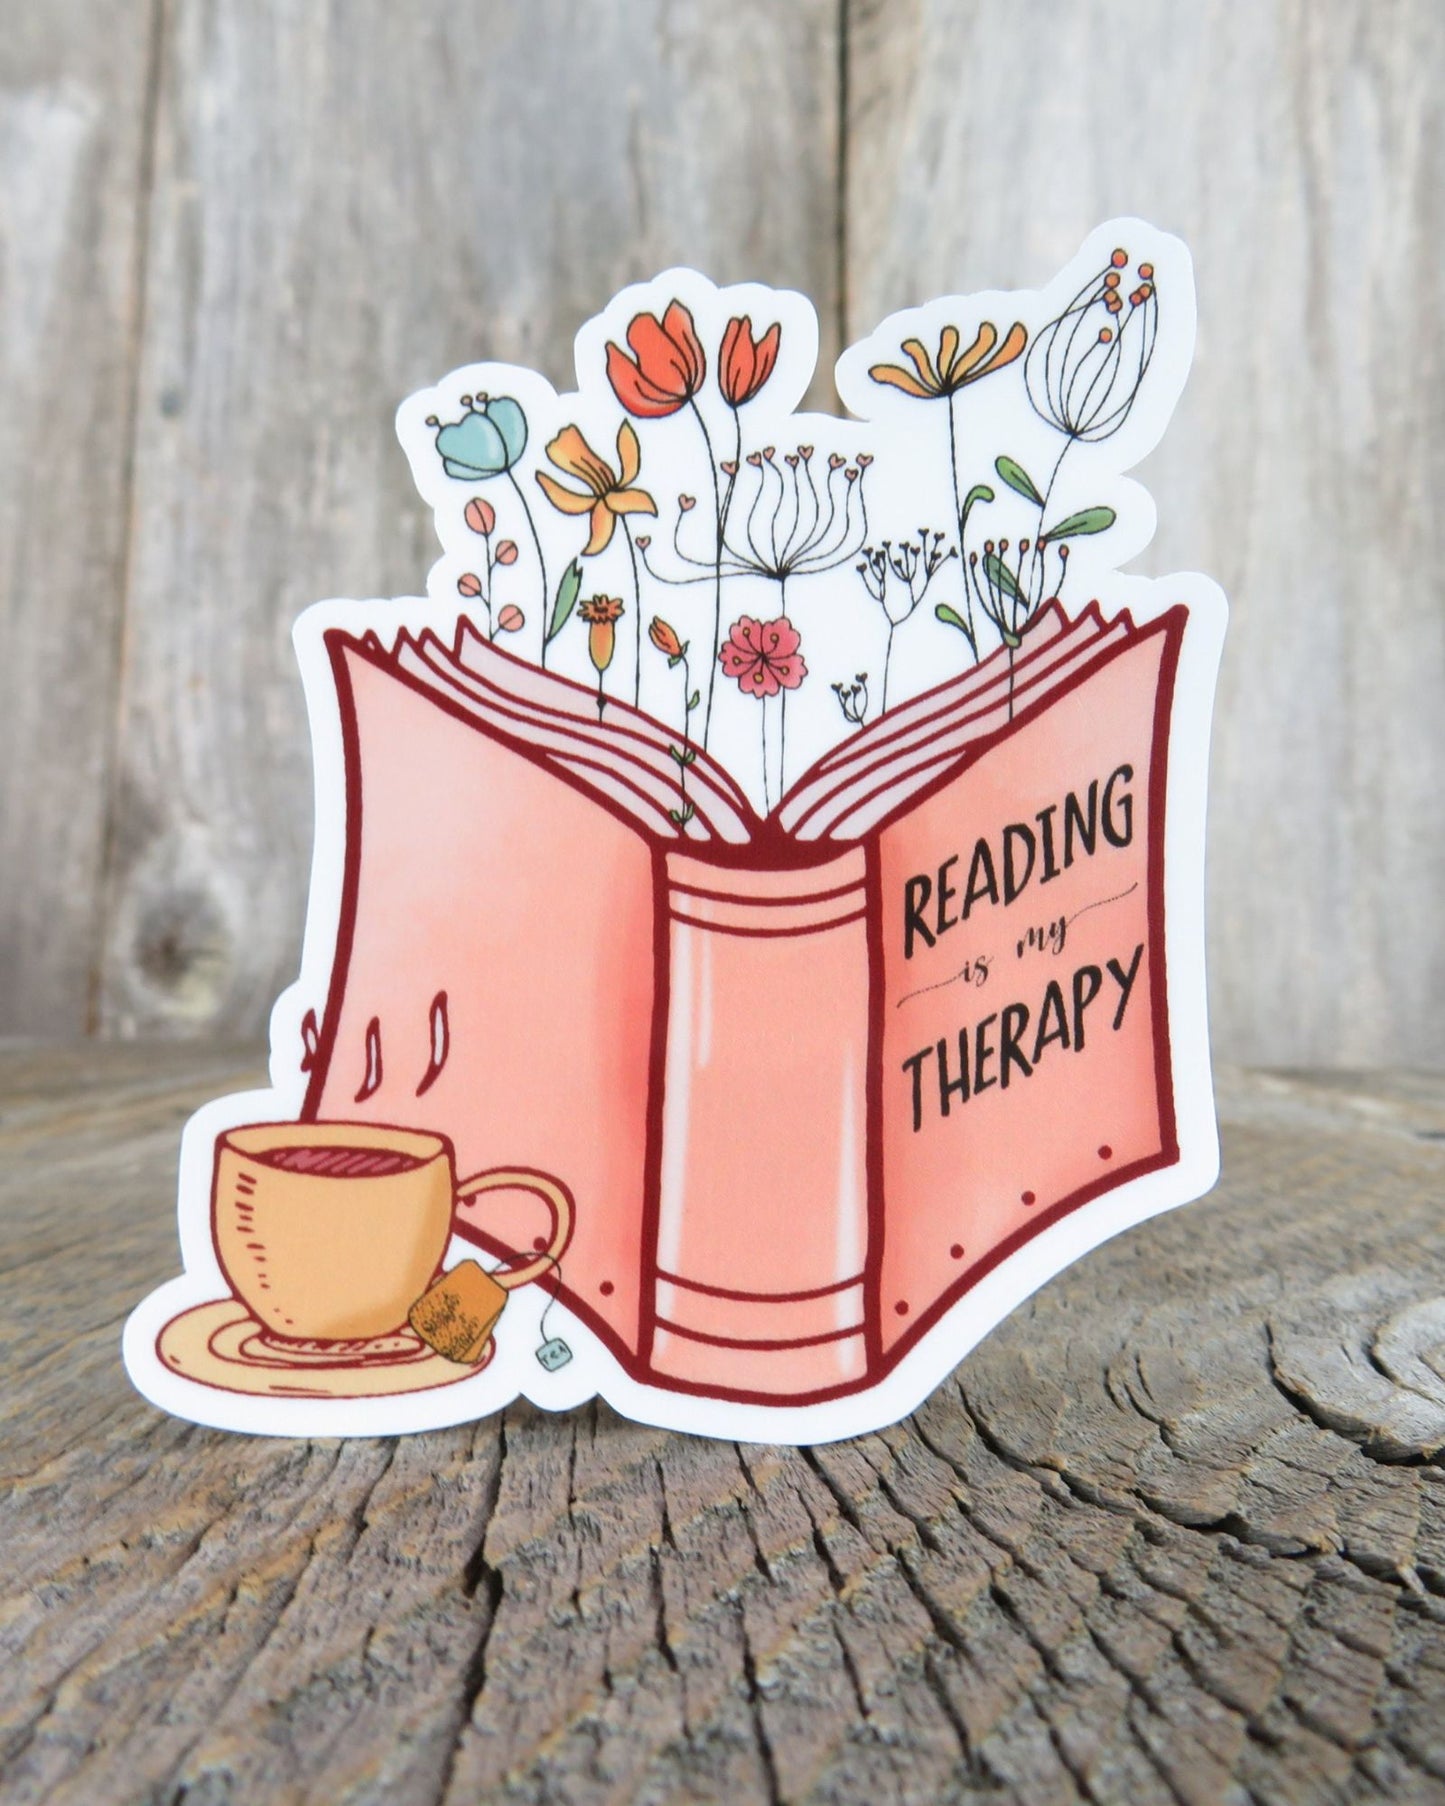 Reading is My Therapy Sticker Book Lovers Readers Gift Waterproof Laptop Sticker Anti-Stress